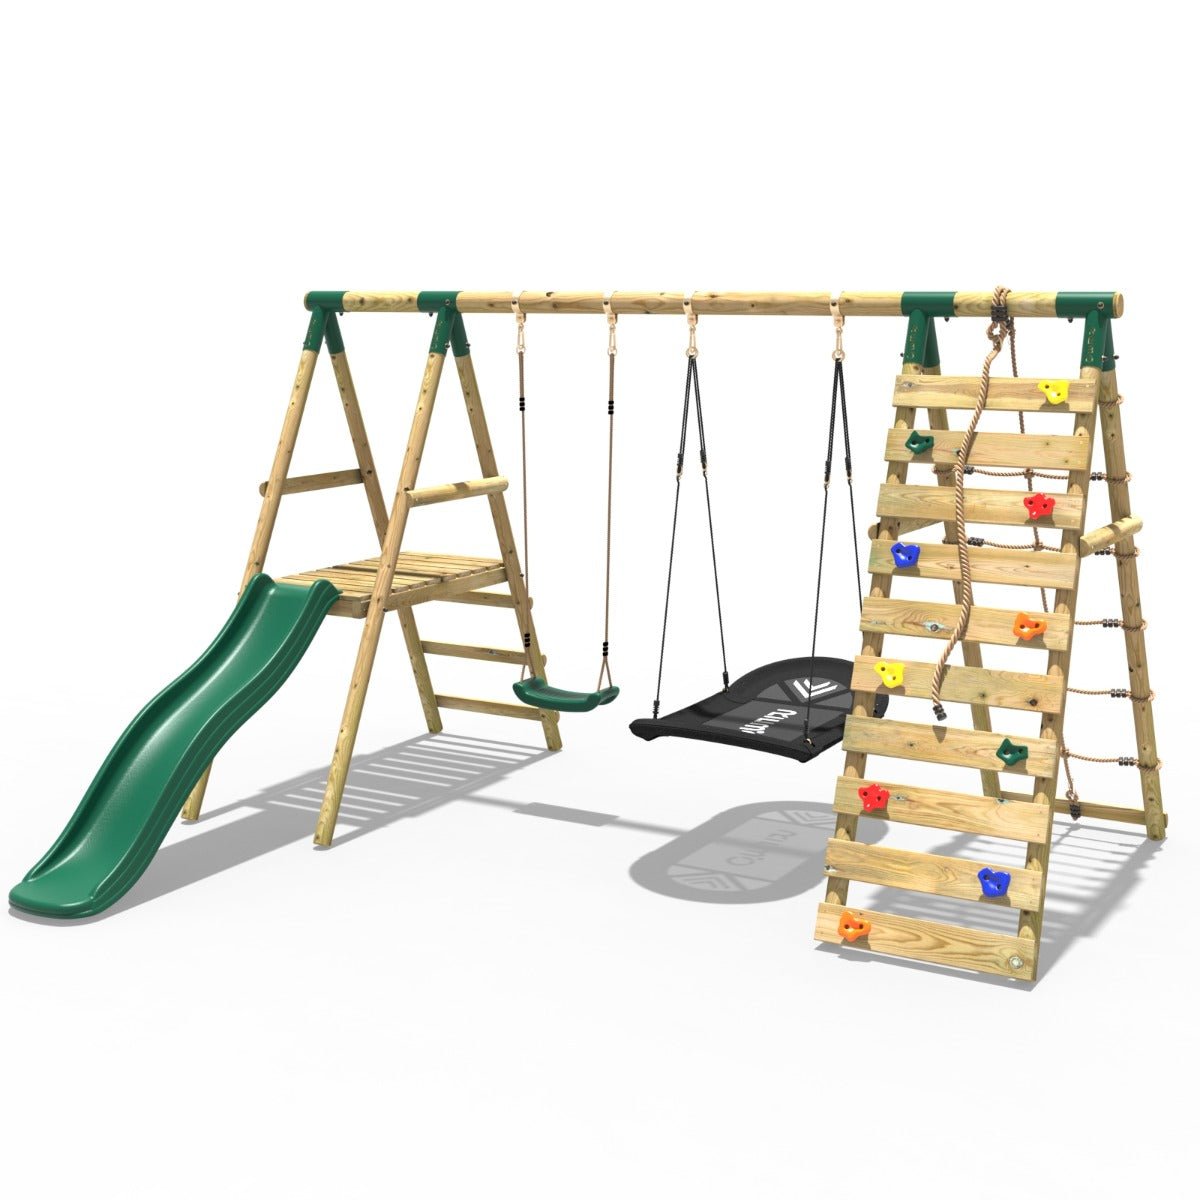 Save 30%: Rebo Wooden Swing Set with Deck and Slide